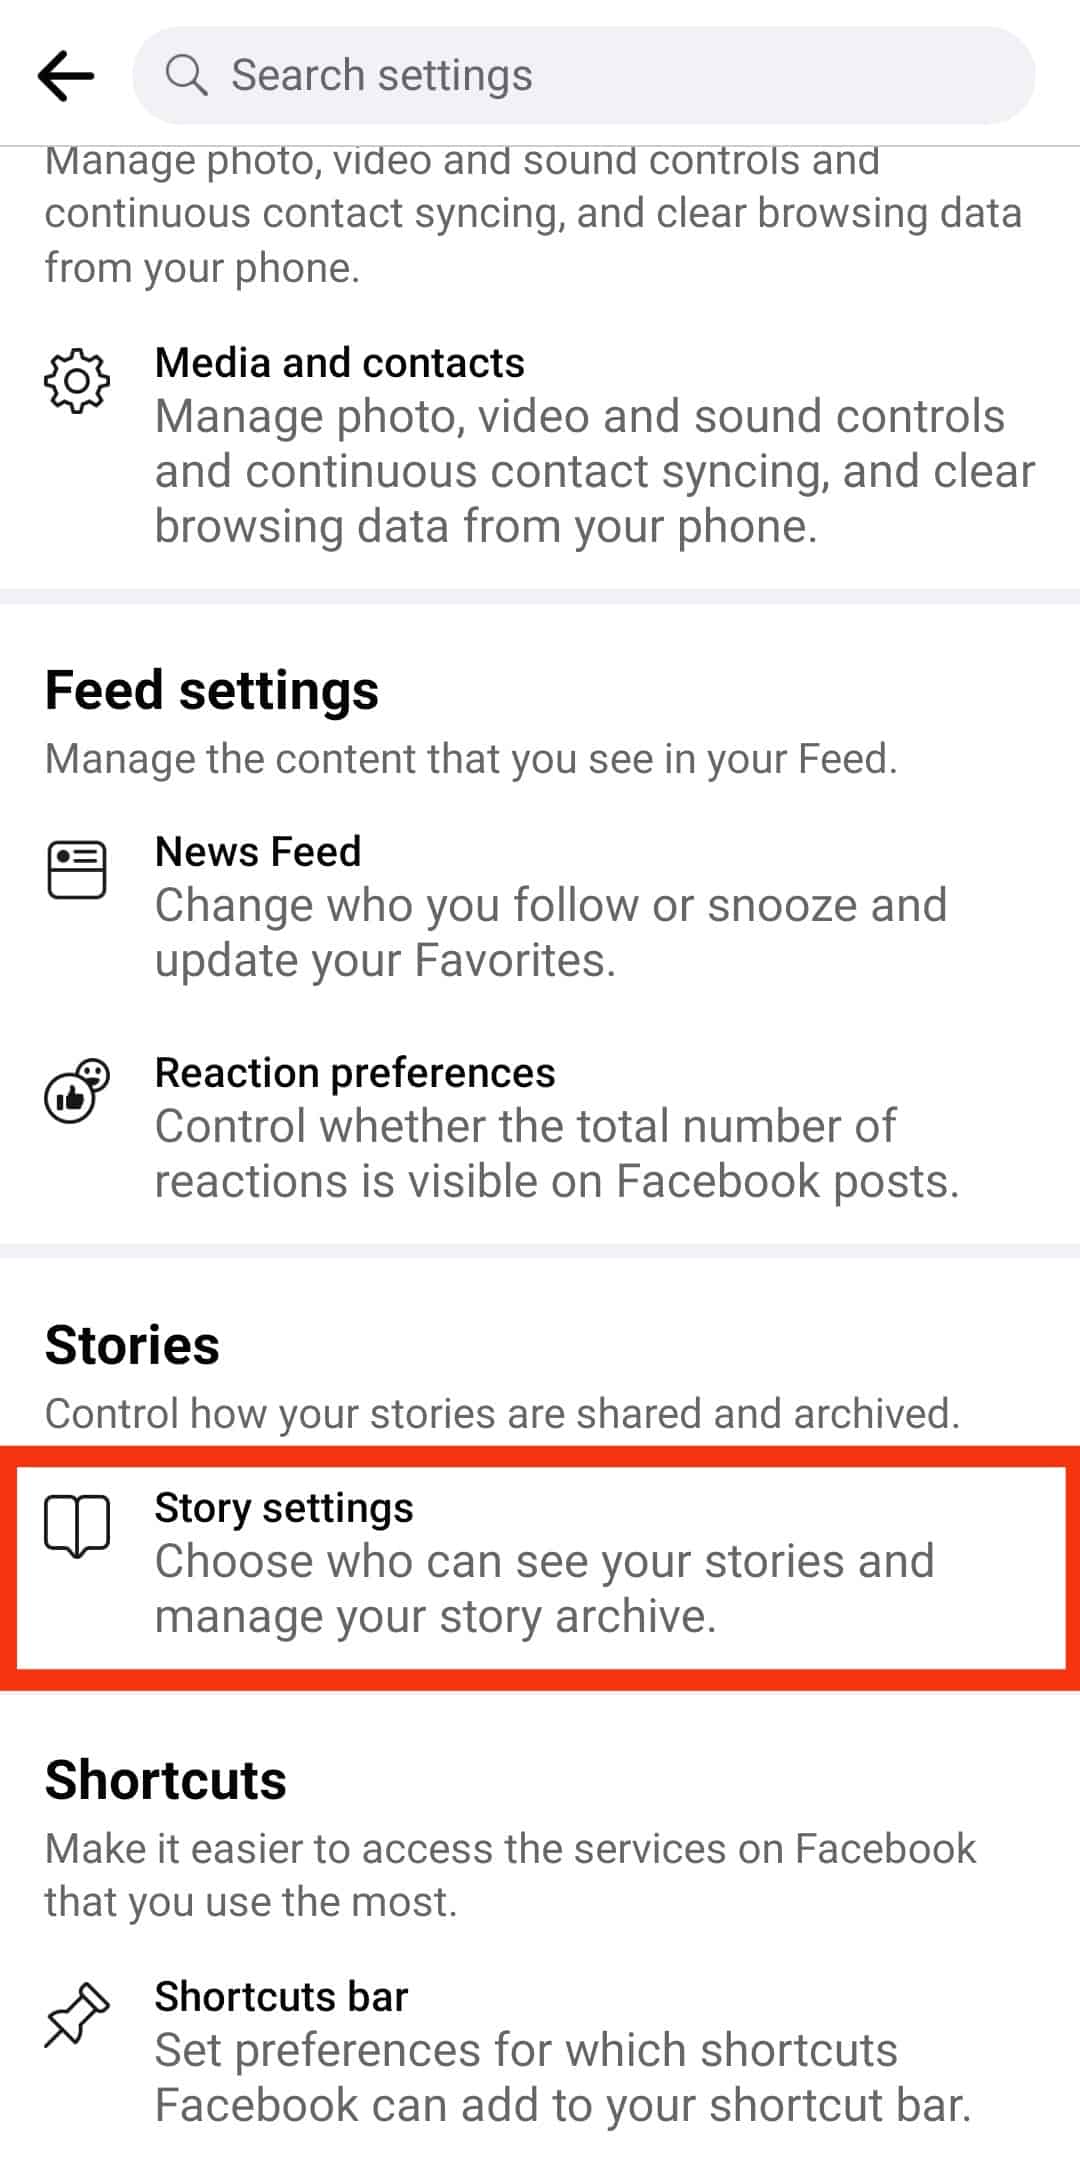 Find The Story Settings Option